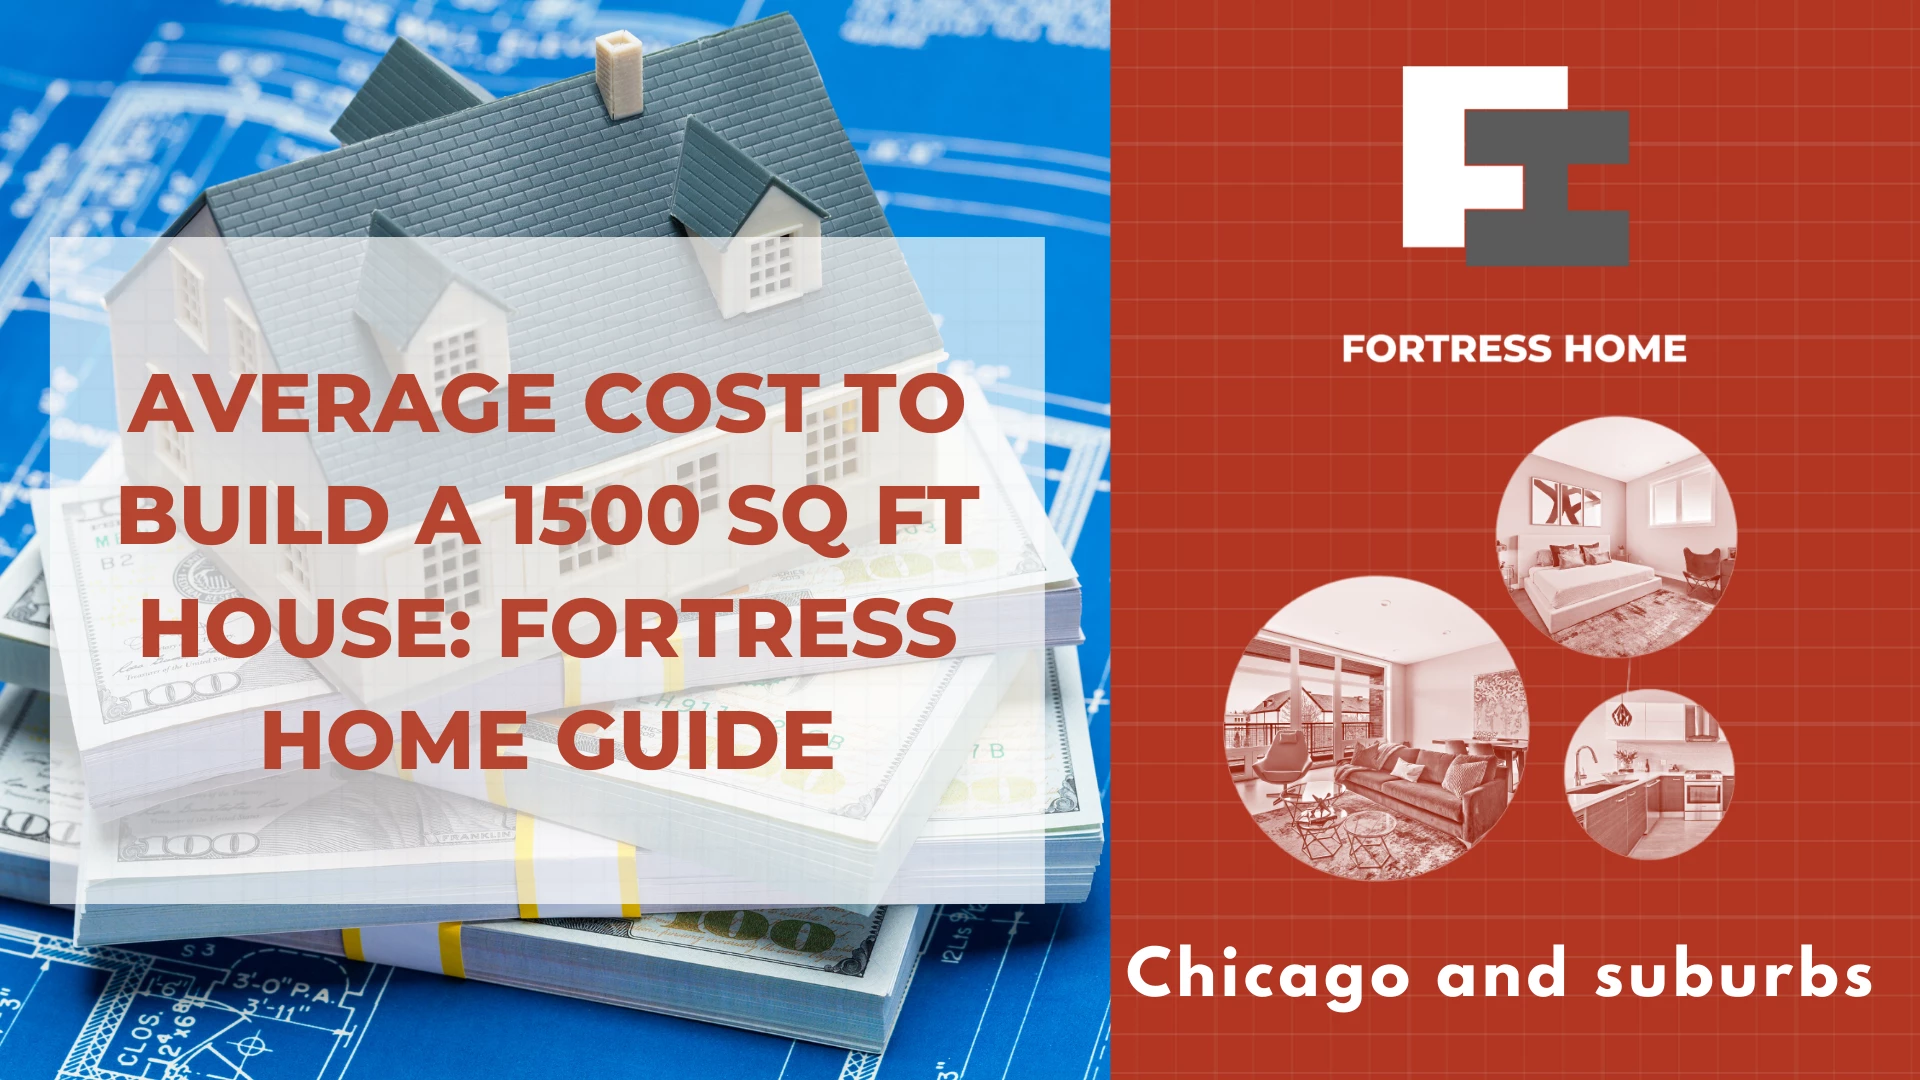 Average Cost to Build a 1500 sq ft House | Chicago Construction